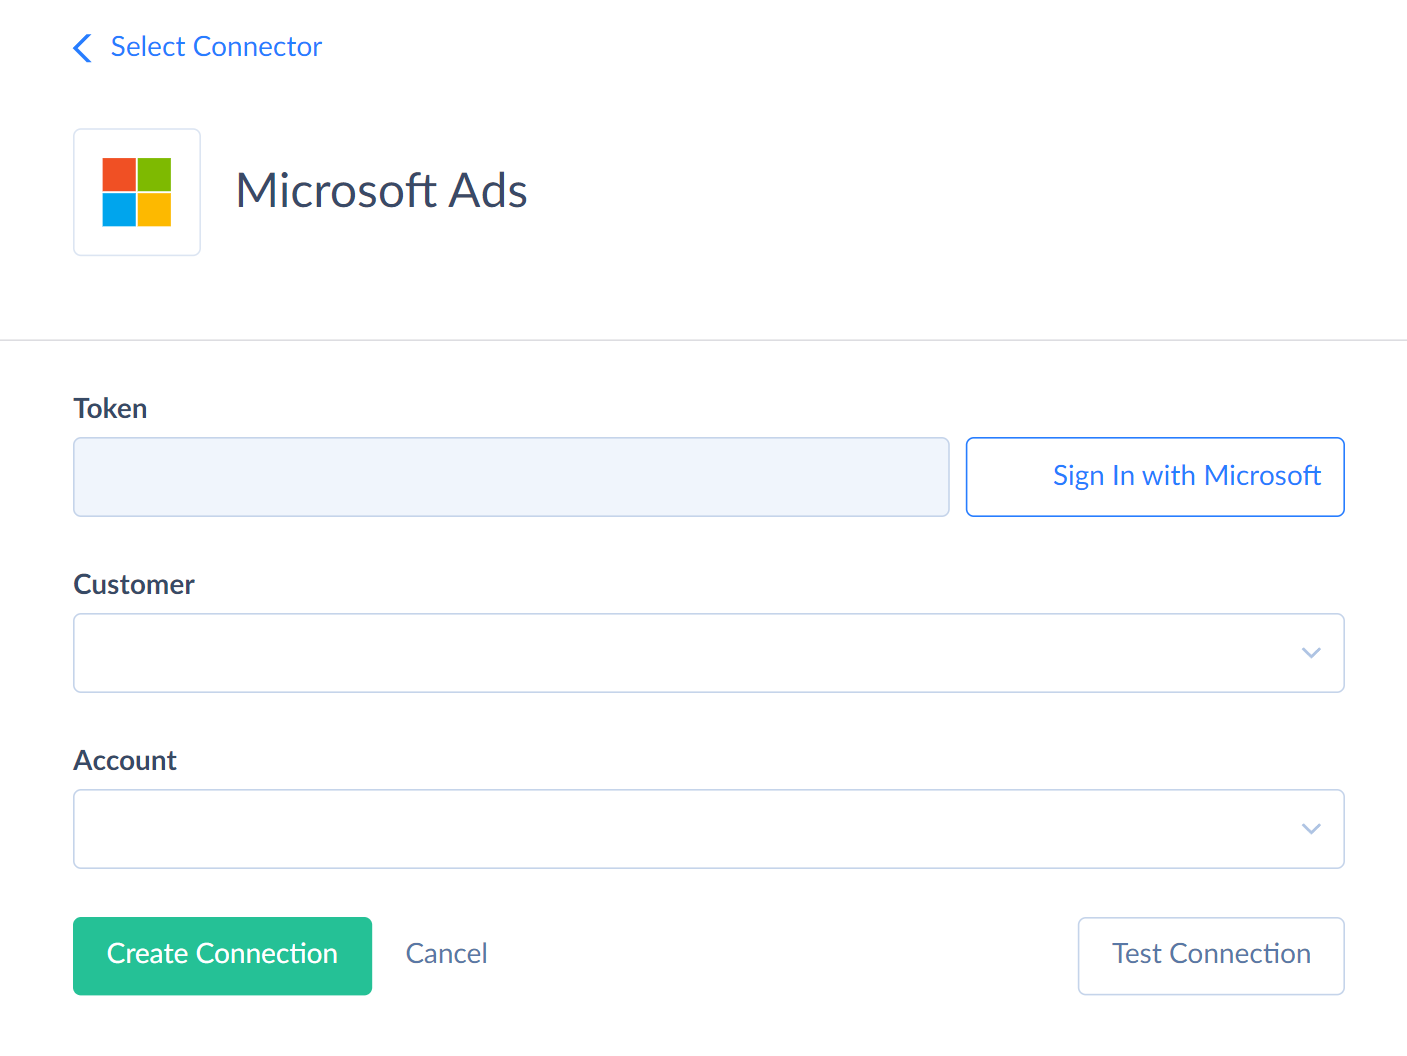 Microsoft Ads connections